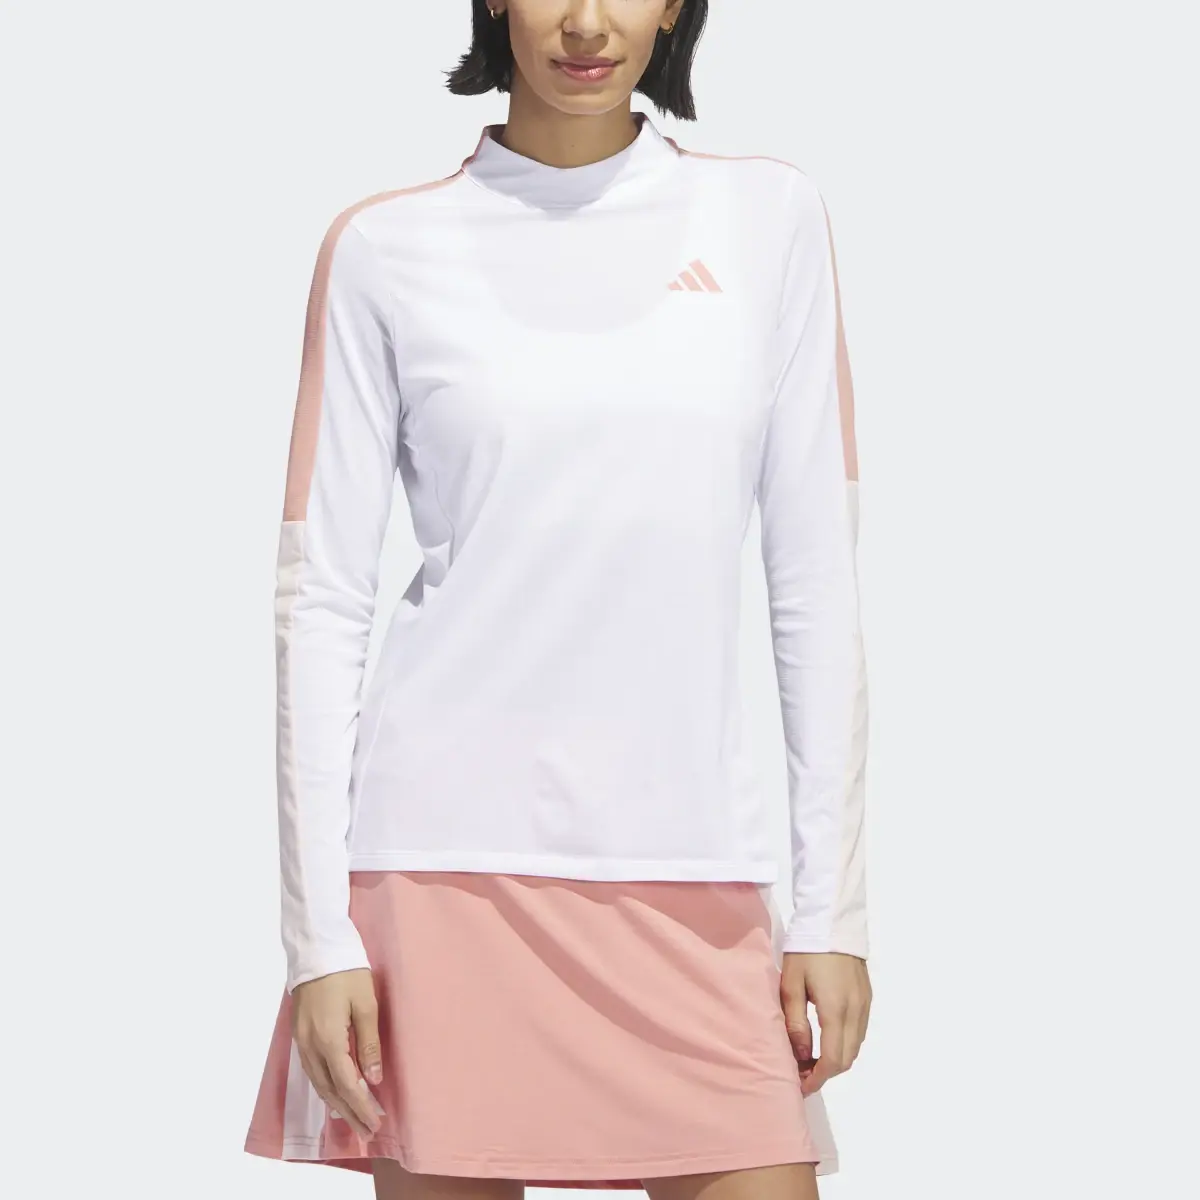 Adidas Made With Nature Mock Neck Long-Sleeve Top. 1